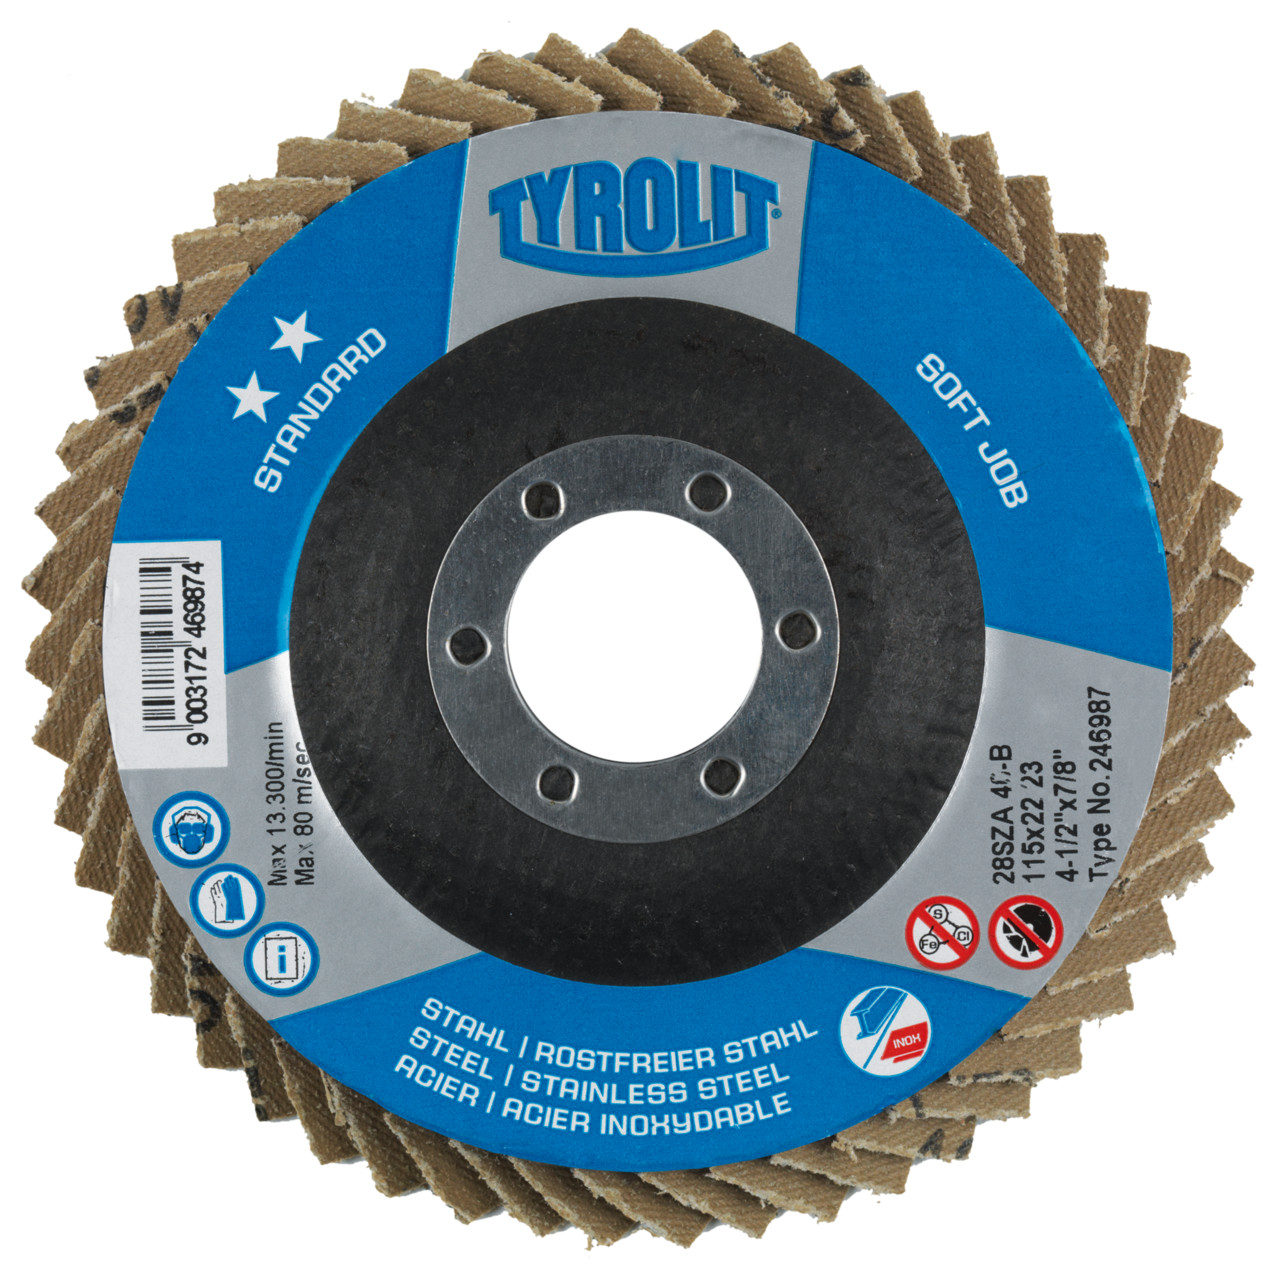 Tyrolit SOFTJOB DxH 115x22.23 2in1 for steel and stainless steel, P80, shape: 28S - straight version (SOFTJOB flap disc), Art. 246990